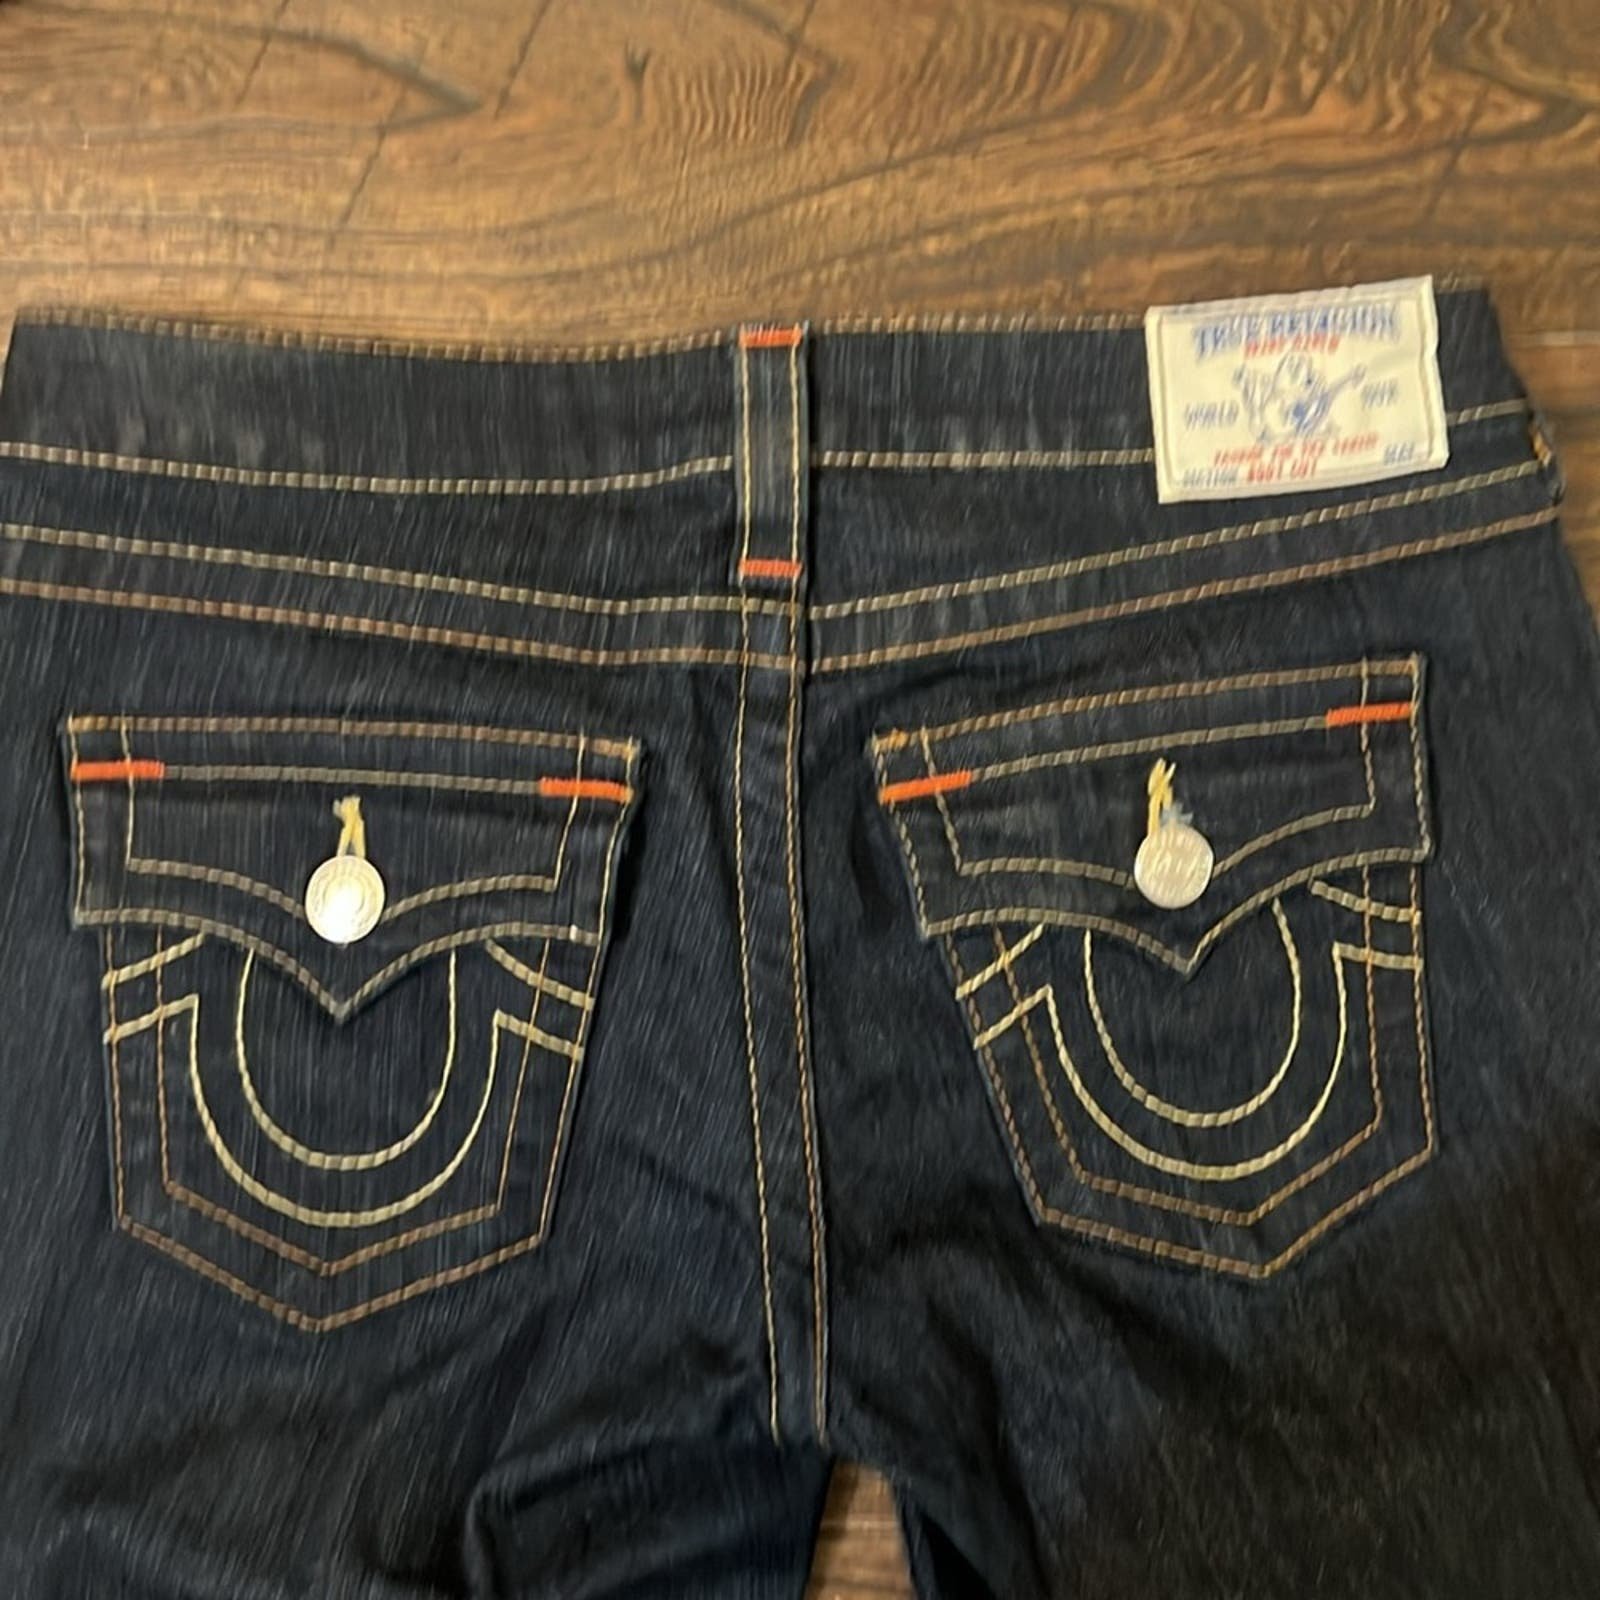 good price TRUE RELIGION BECKY LOW RISE BOOT CUT DARK WASH JEANS SIZE 28 OOgxAzwxL online store